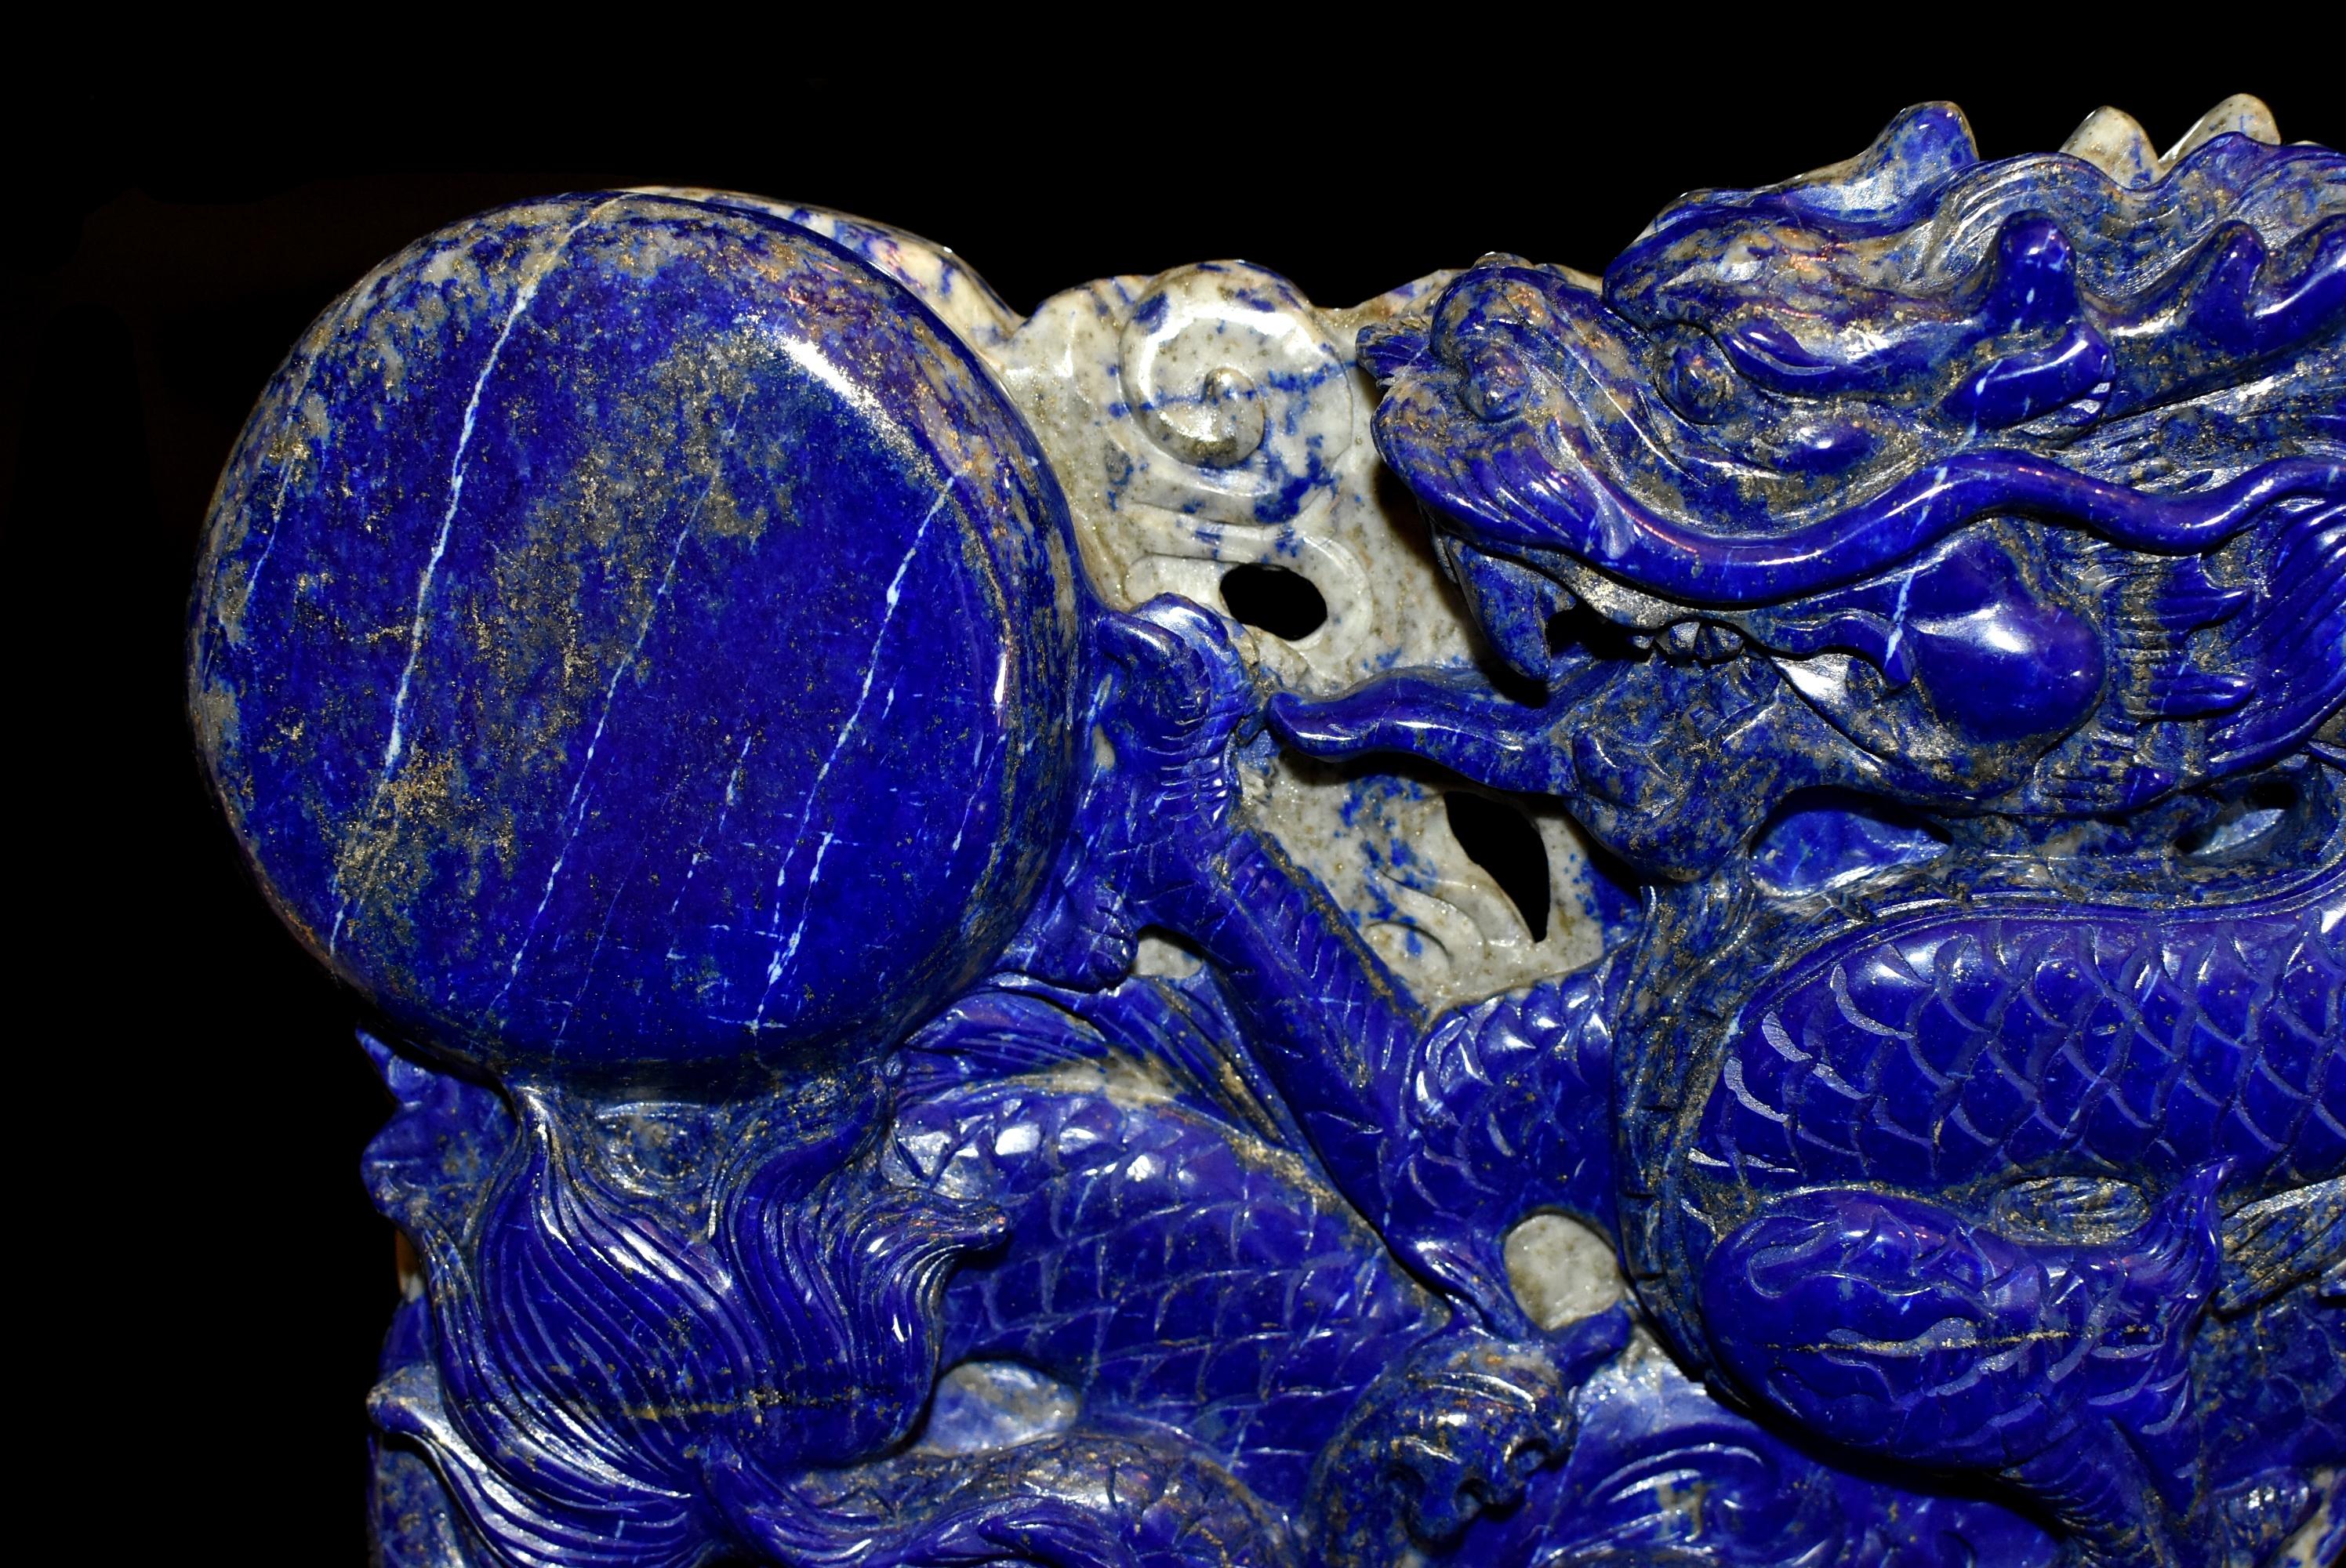 Afghan Natural Lapis Lazuli Dragon Chasing Pearl Statue, Fine Grade Hand Carved For Sale